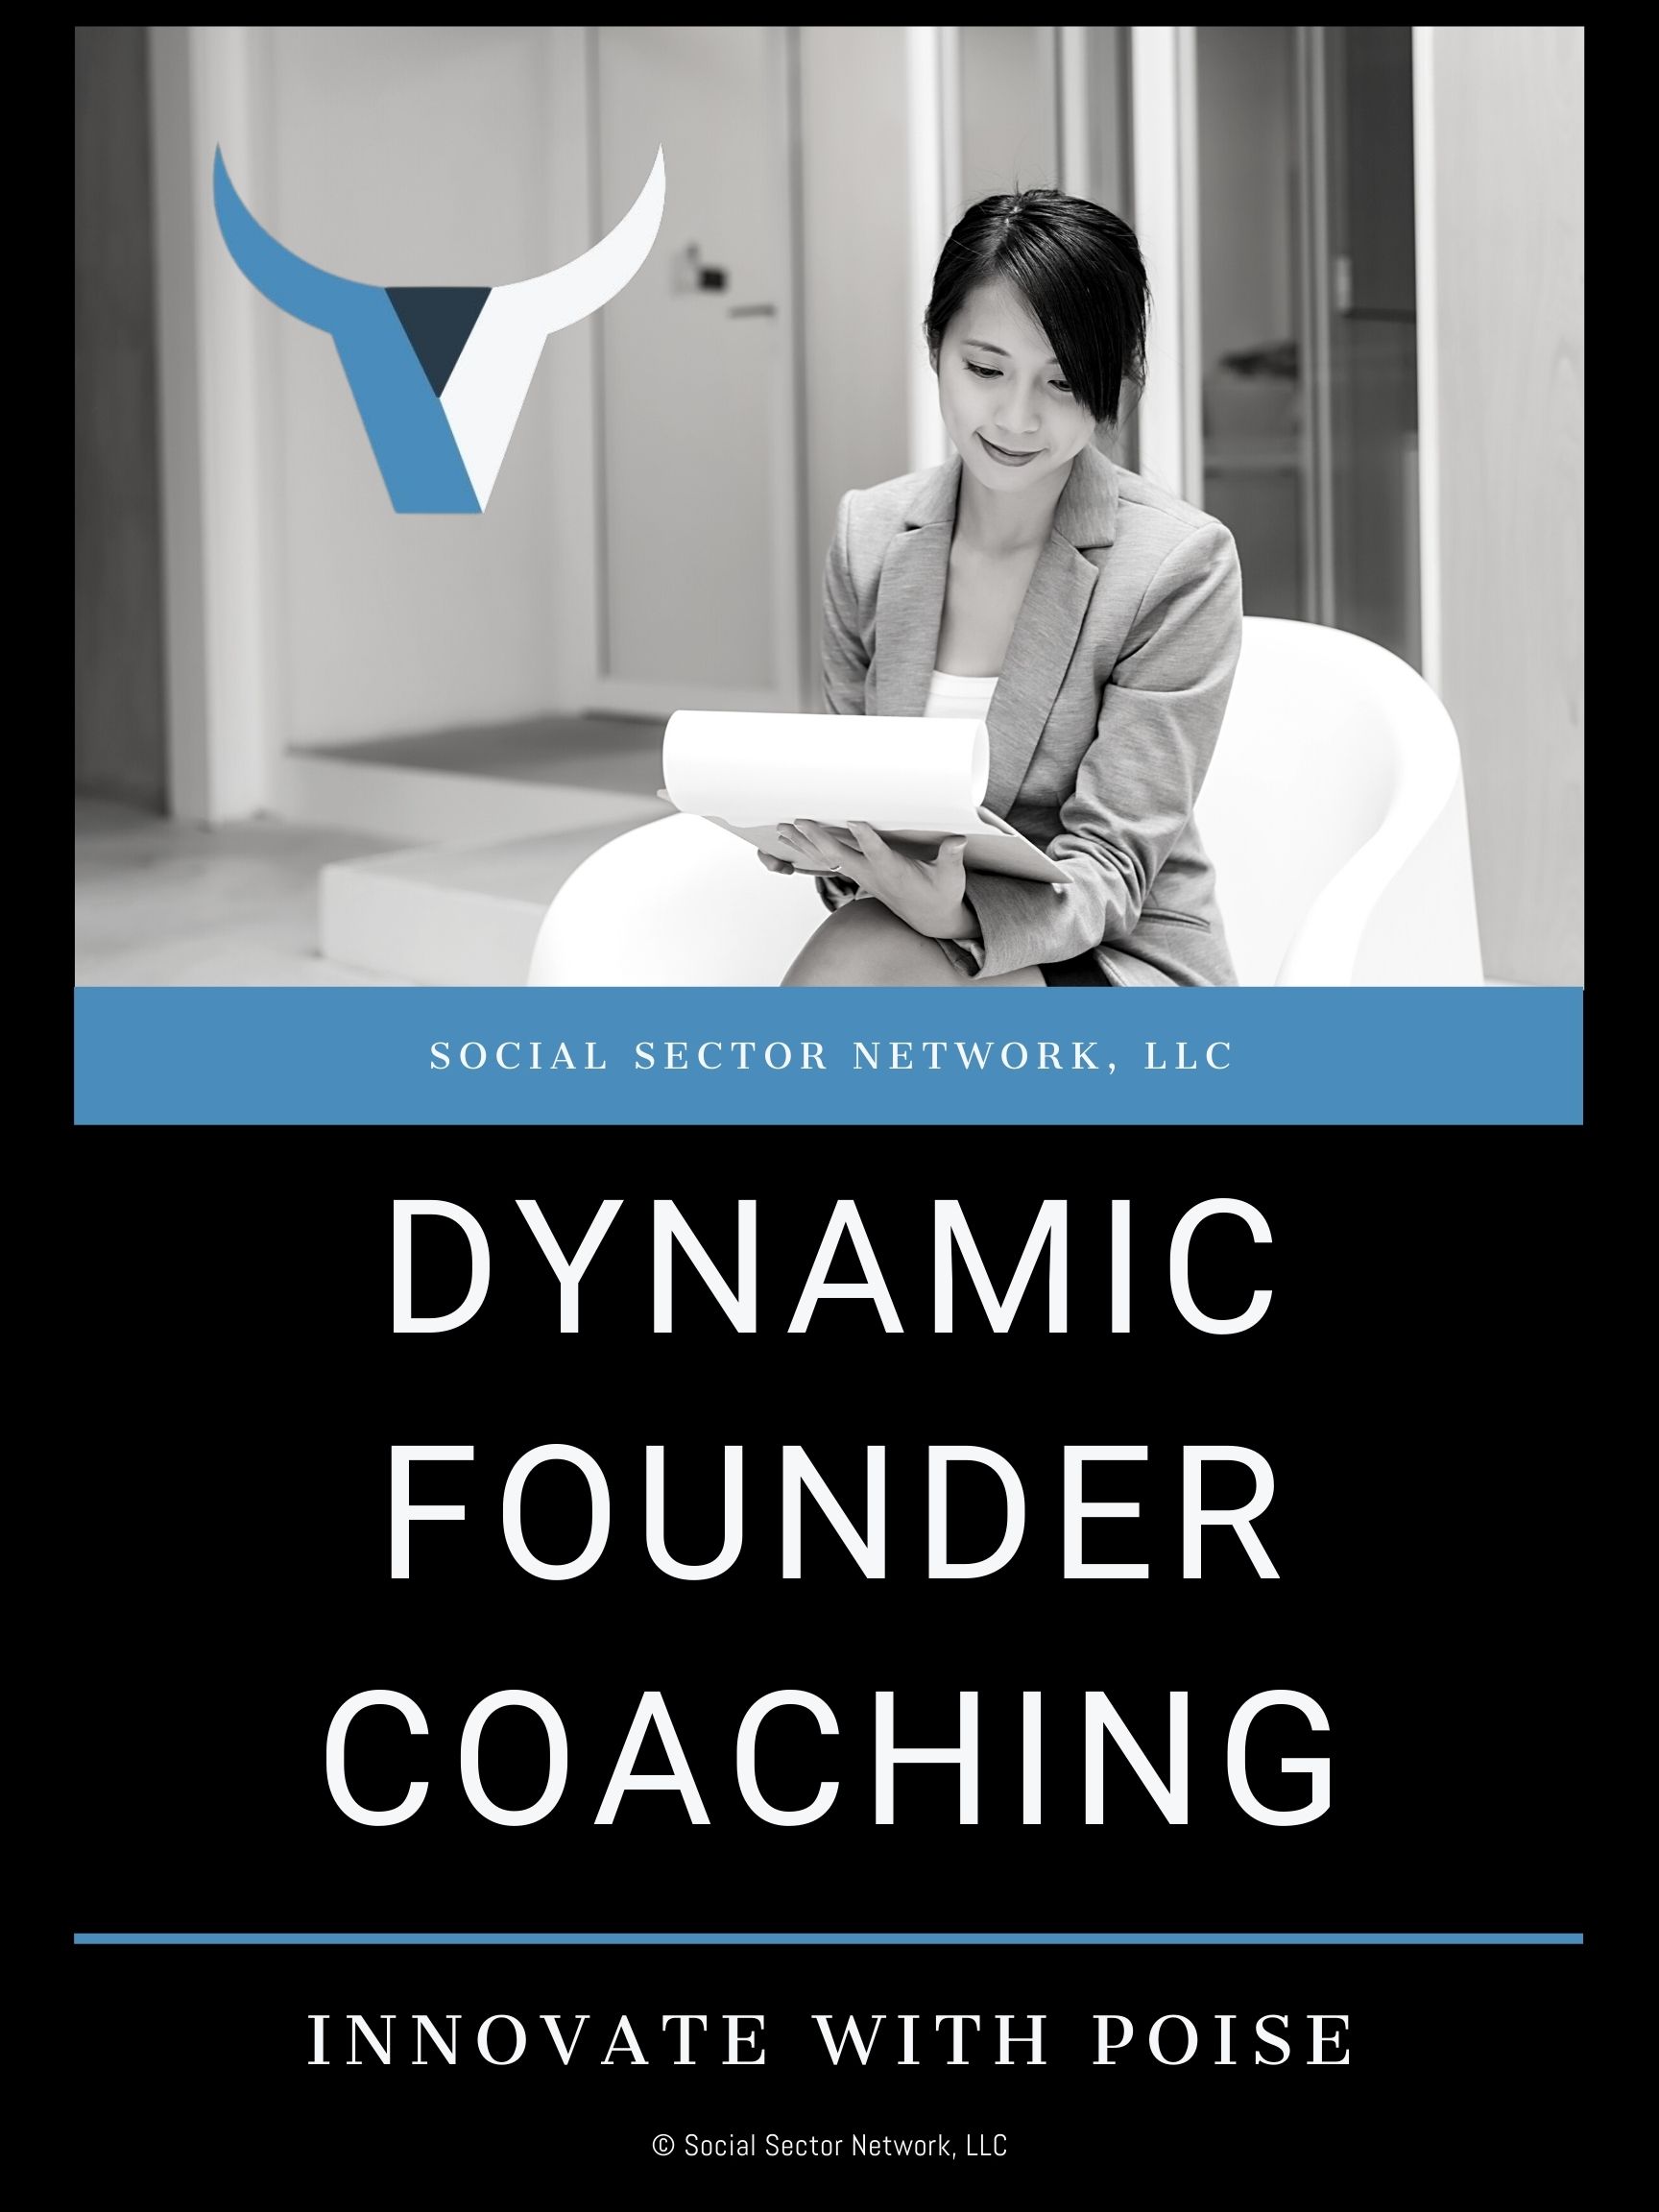 Dynamic Founder Coaching - Social Sector Network